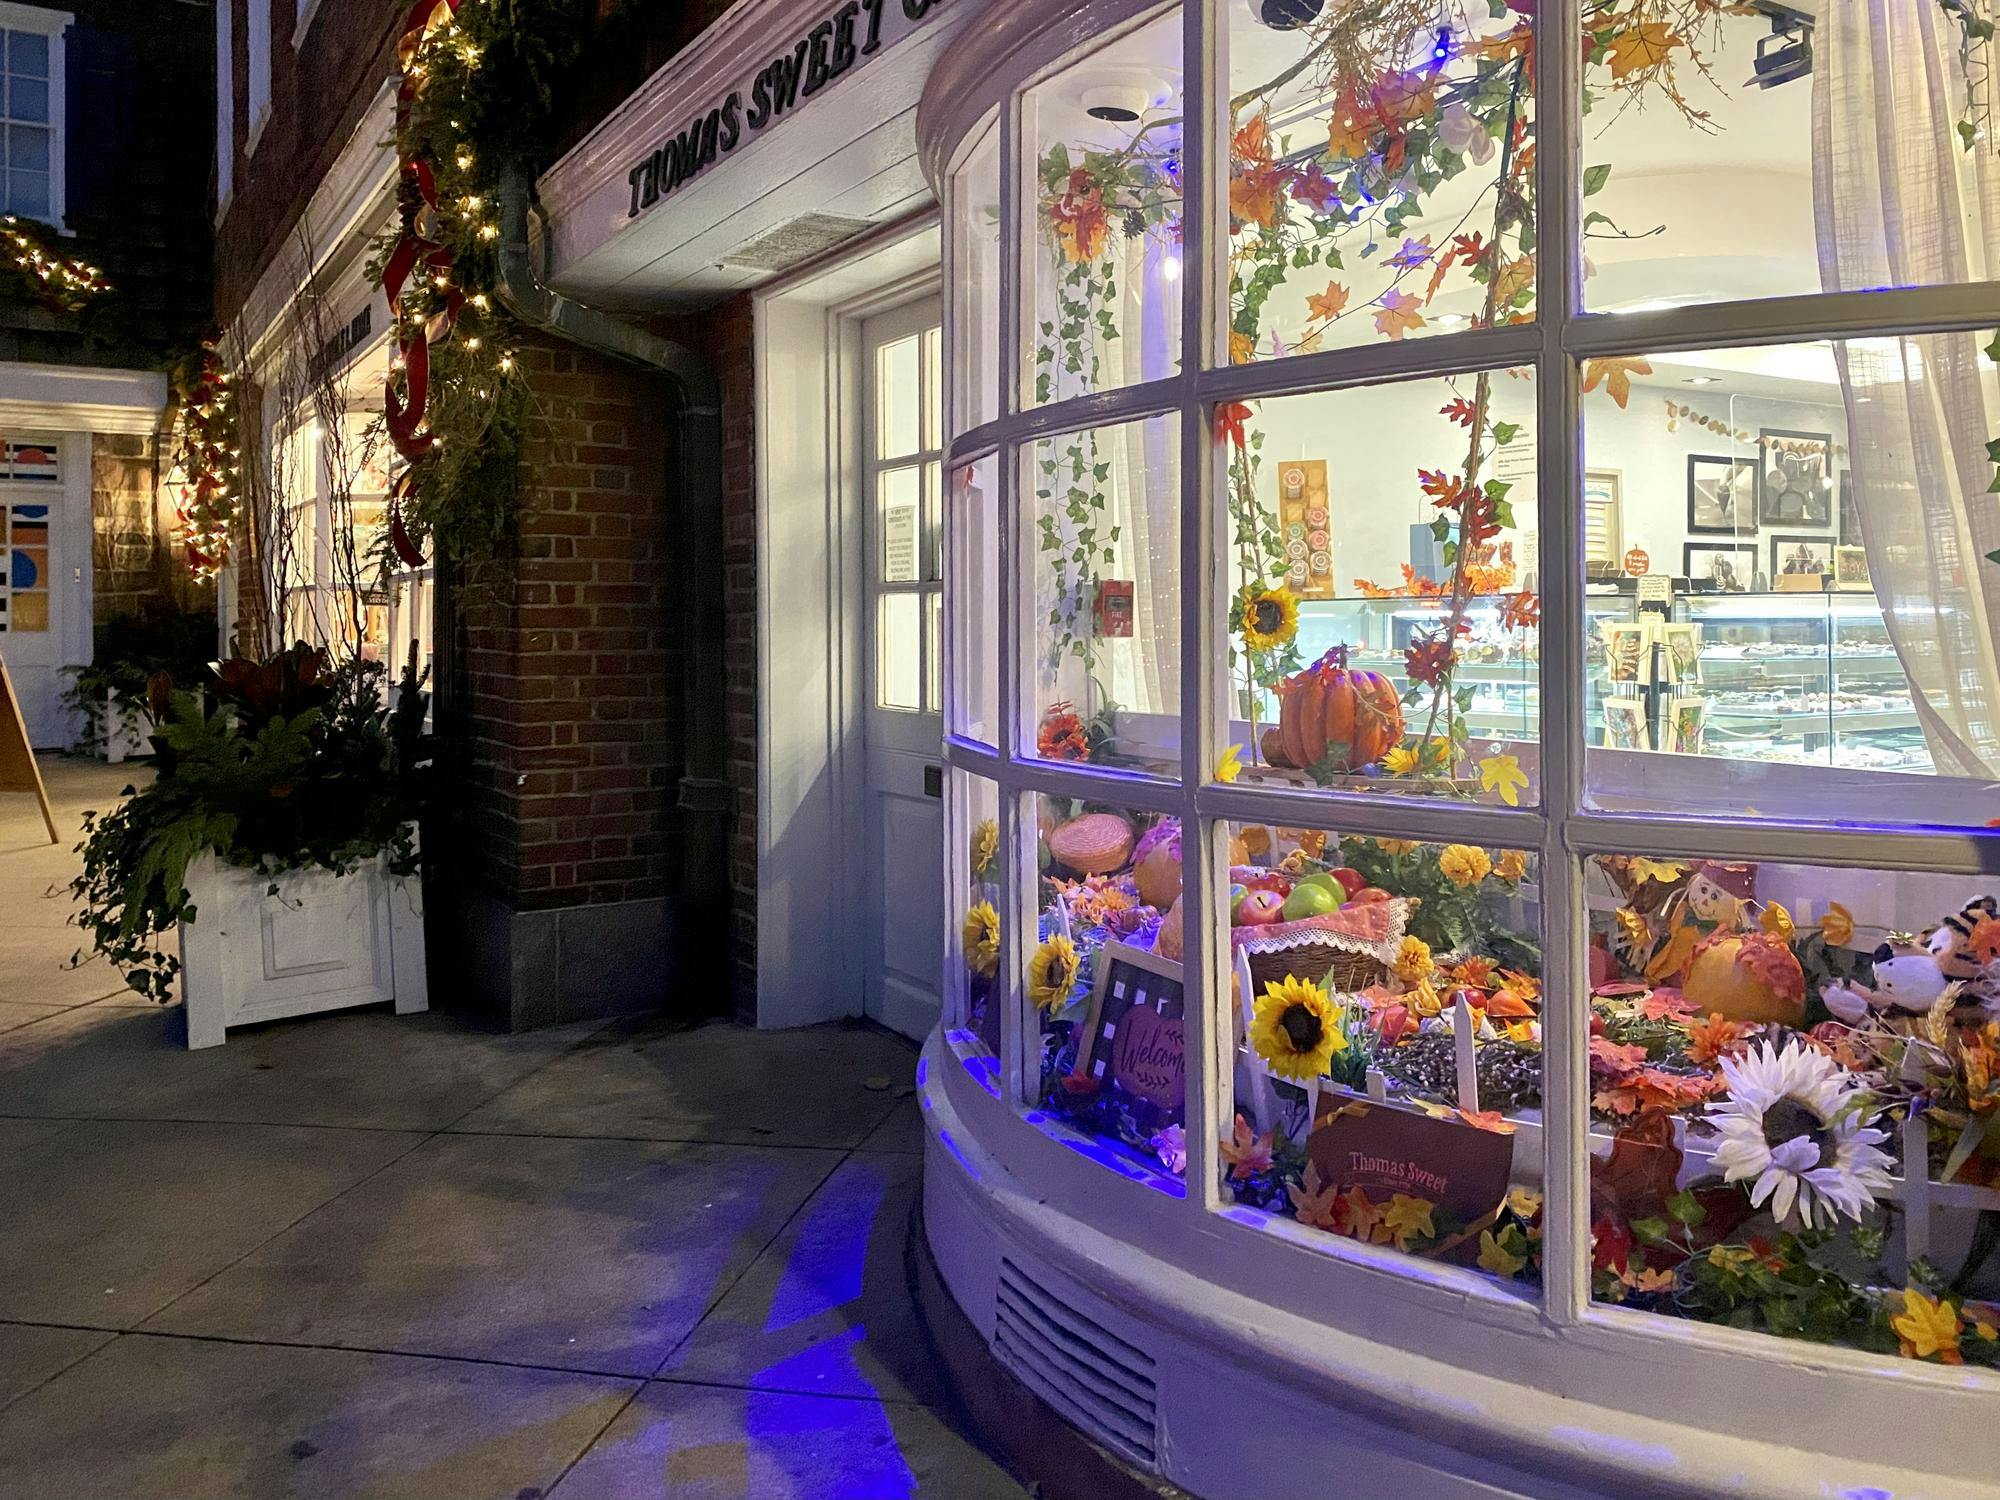 Storefront in darkly lit streetway with bright decorations including flowers and pumpkins